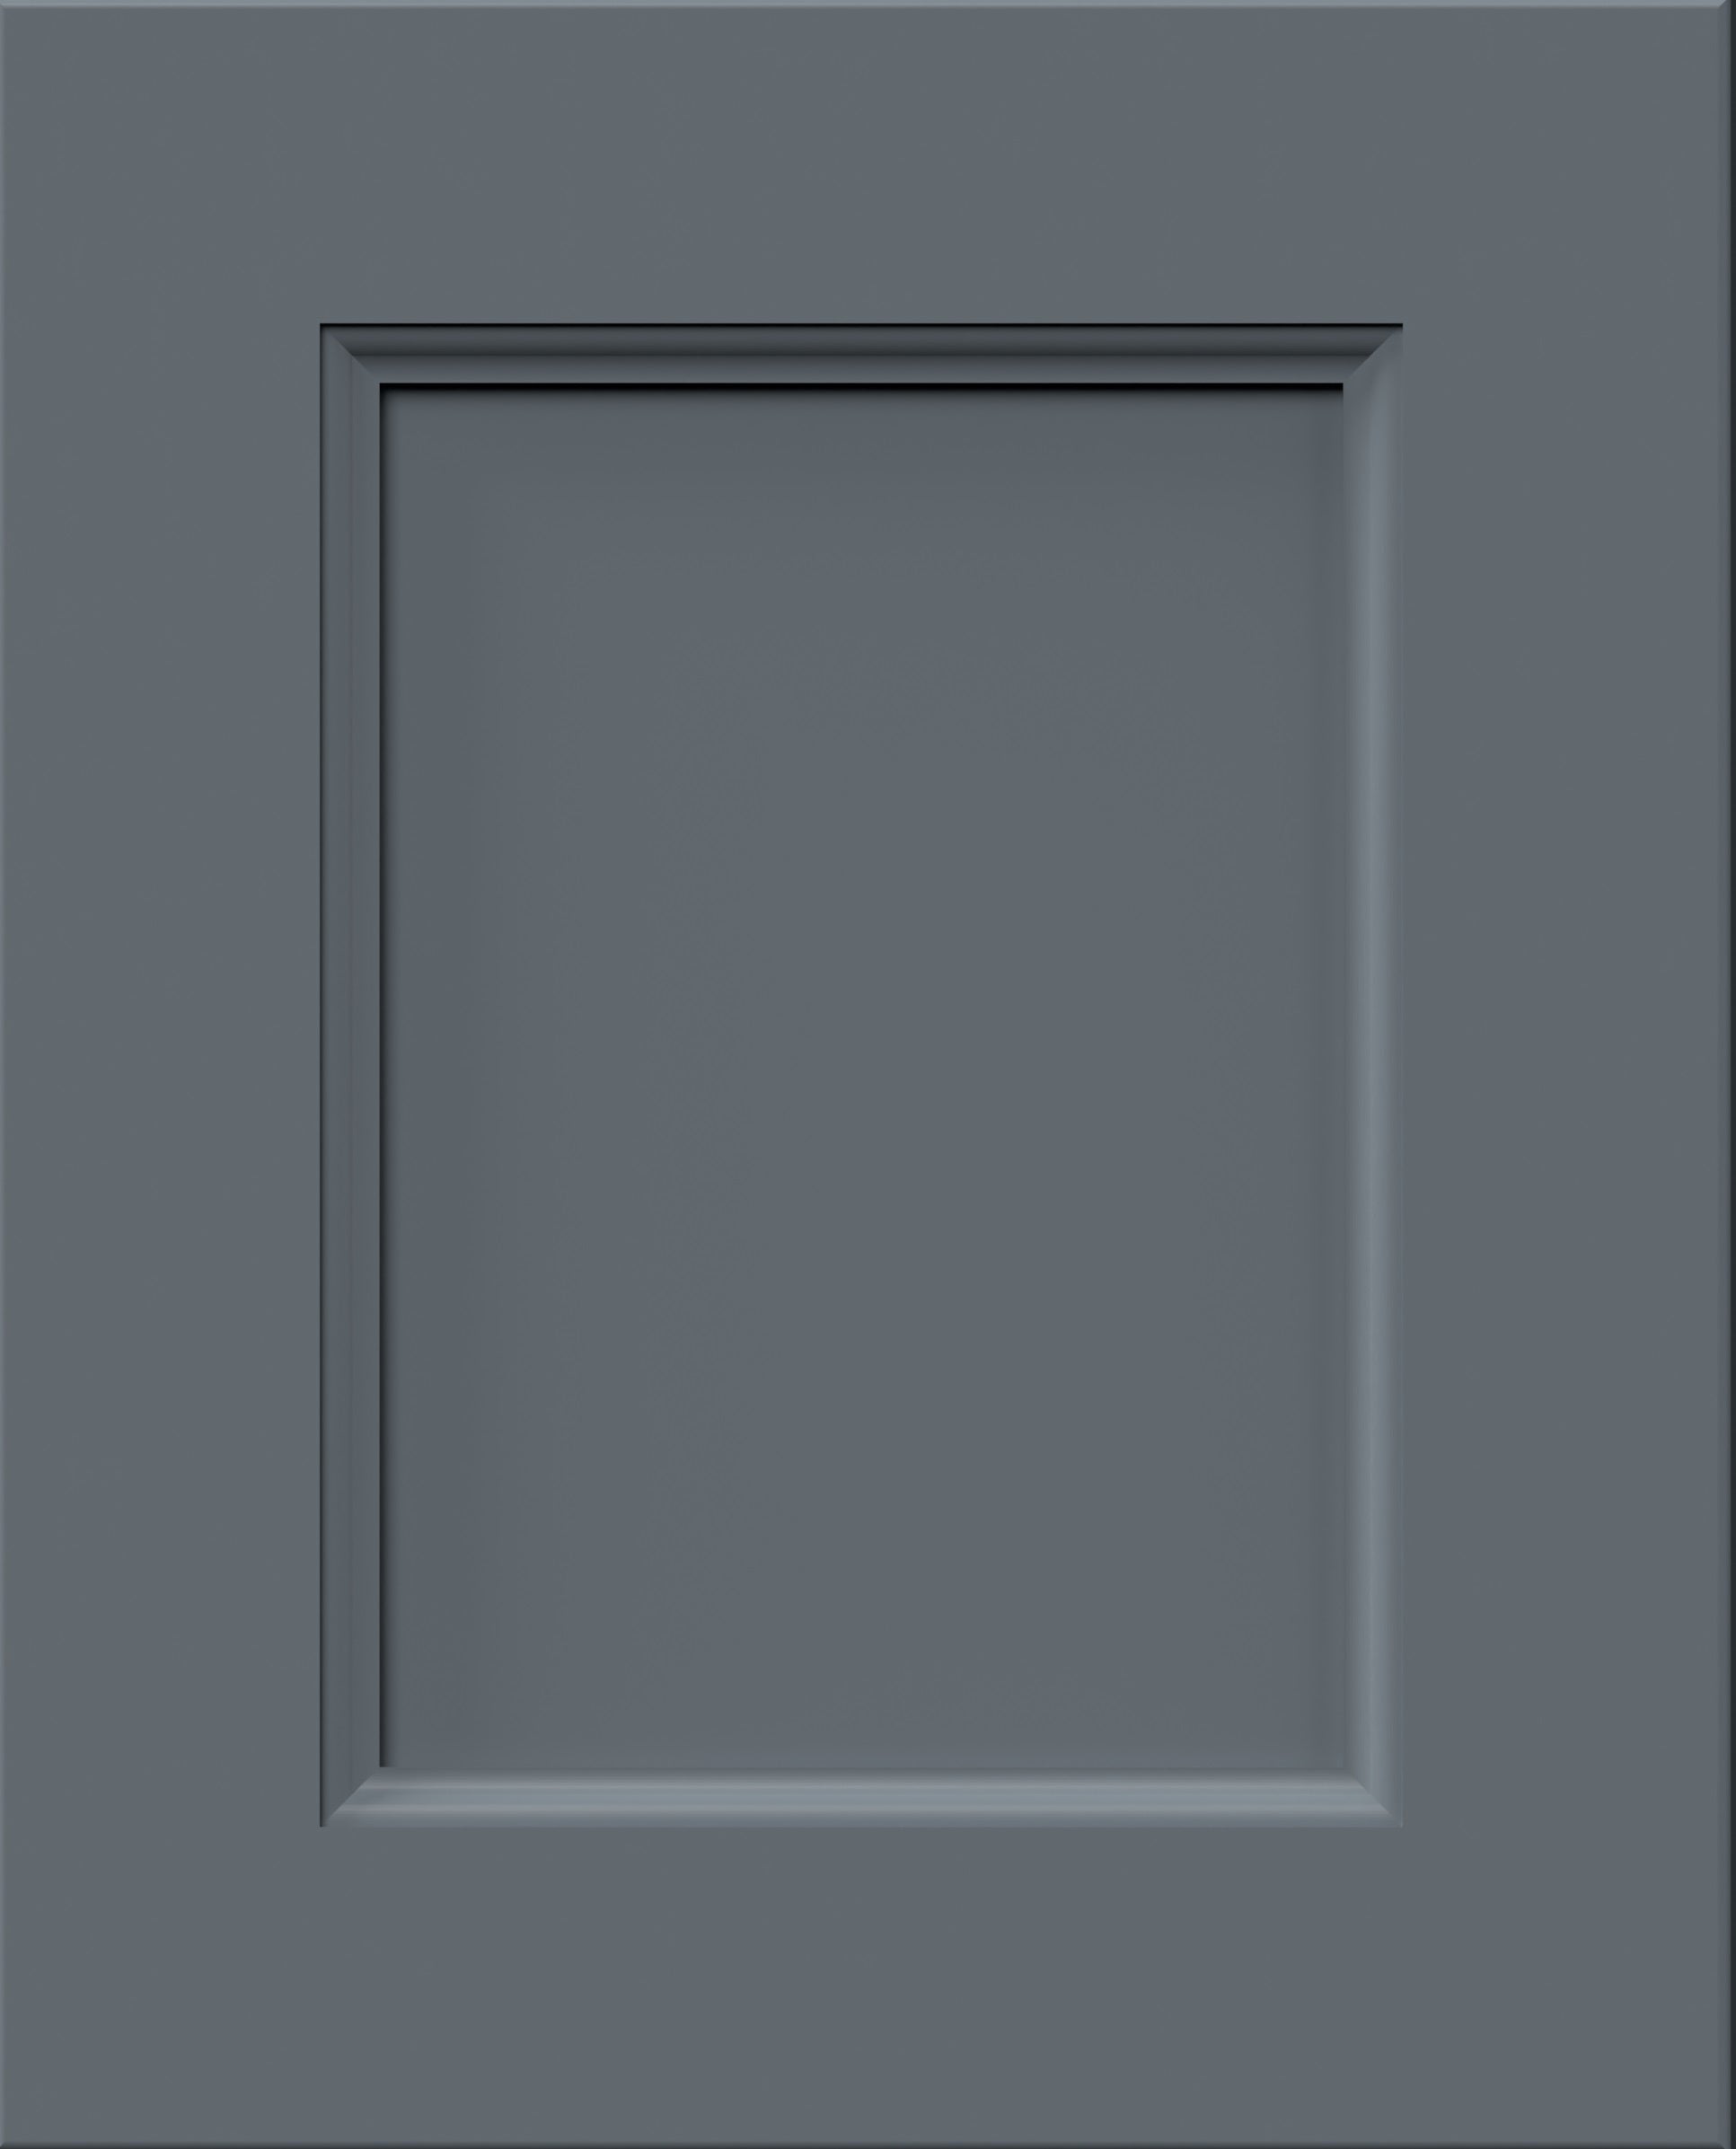 Nexus denim blue small sample door. Recessed cabinet door with an inner detail in a powdery light blue painted finish.